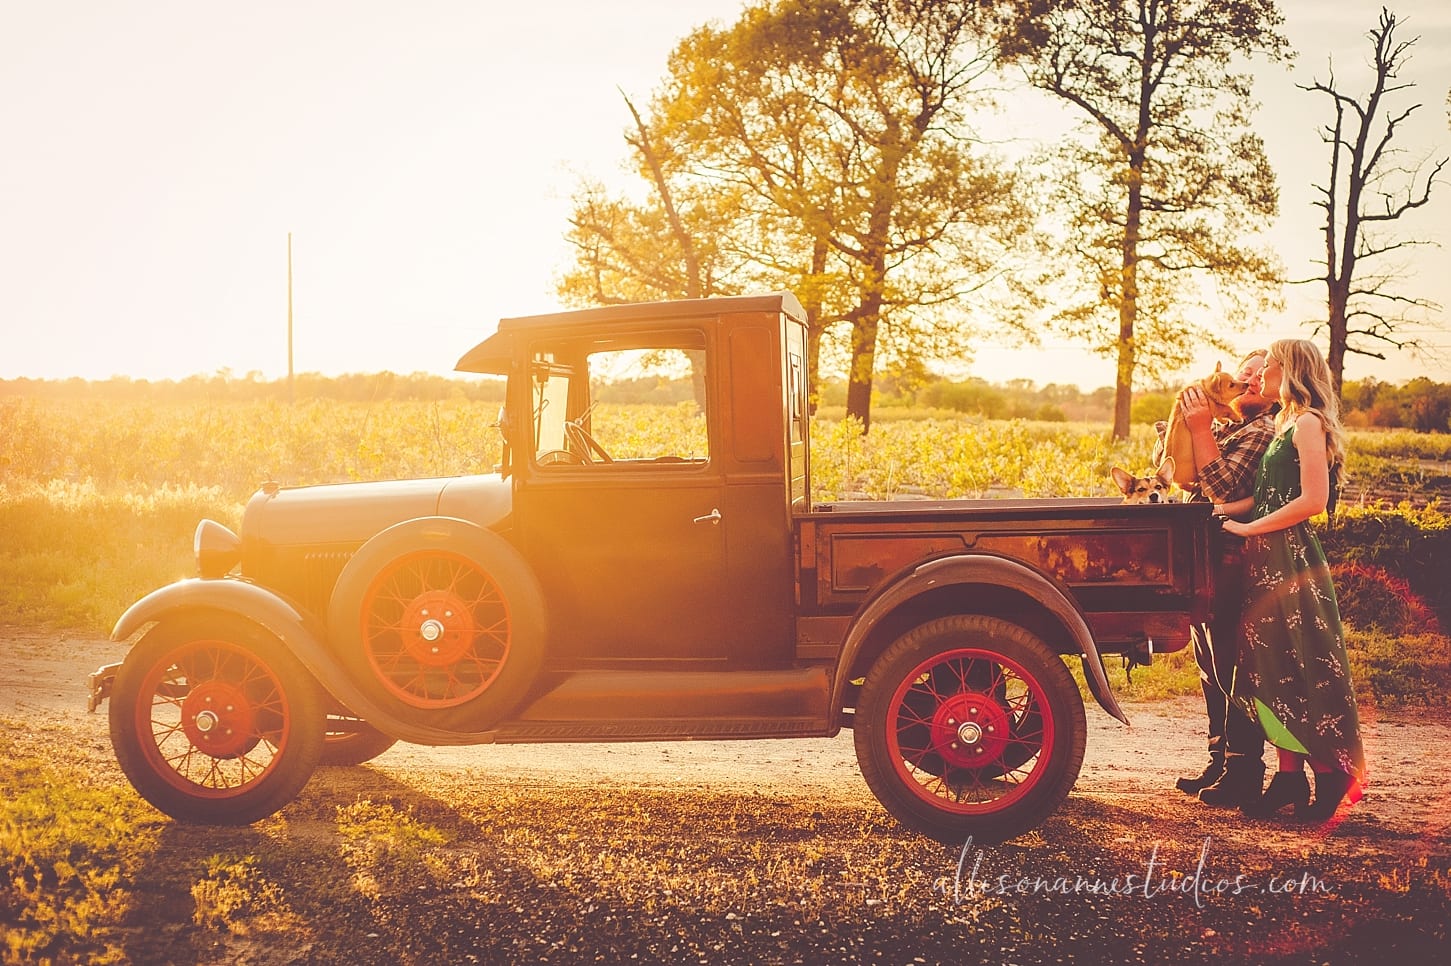 model A, Ford model A, antique trucks, antique cars, south jersey engagements, francescas dresses, promenade marlton NJ, red tires, blueberry farms, bluebird farms, hammonton blueberries, love and antique trucks, sunset engagements, best photographer south jersey